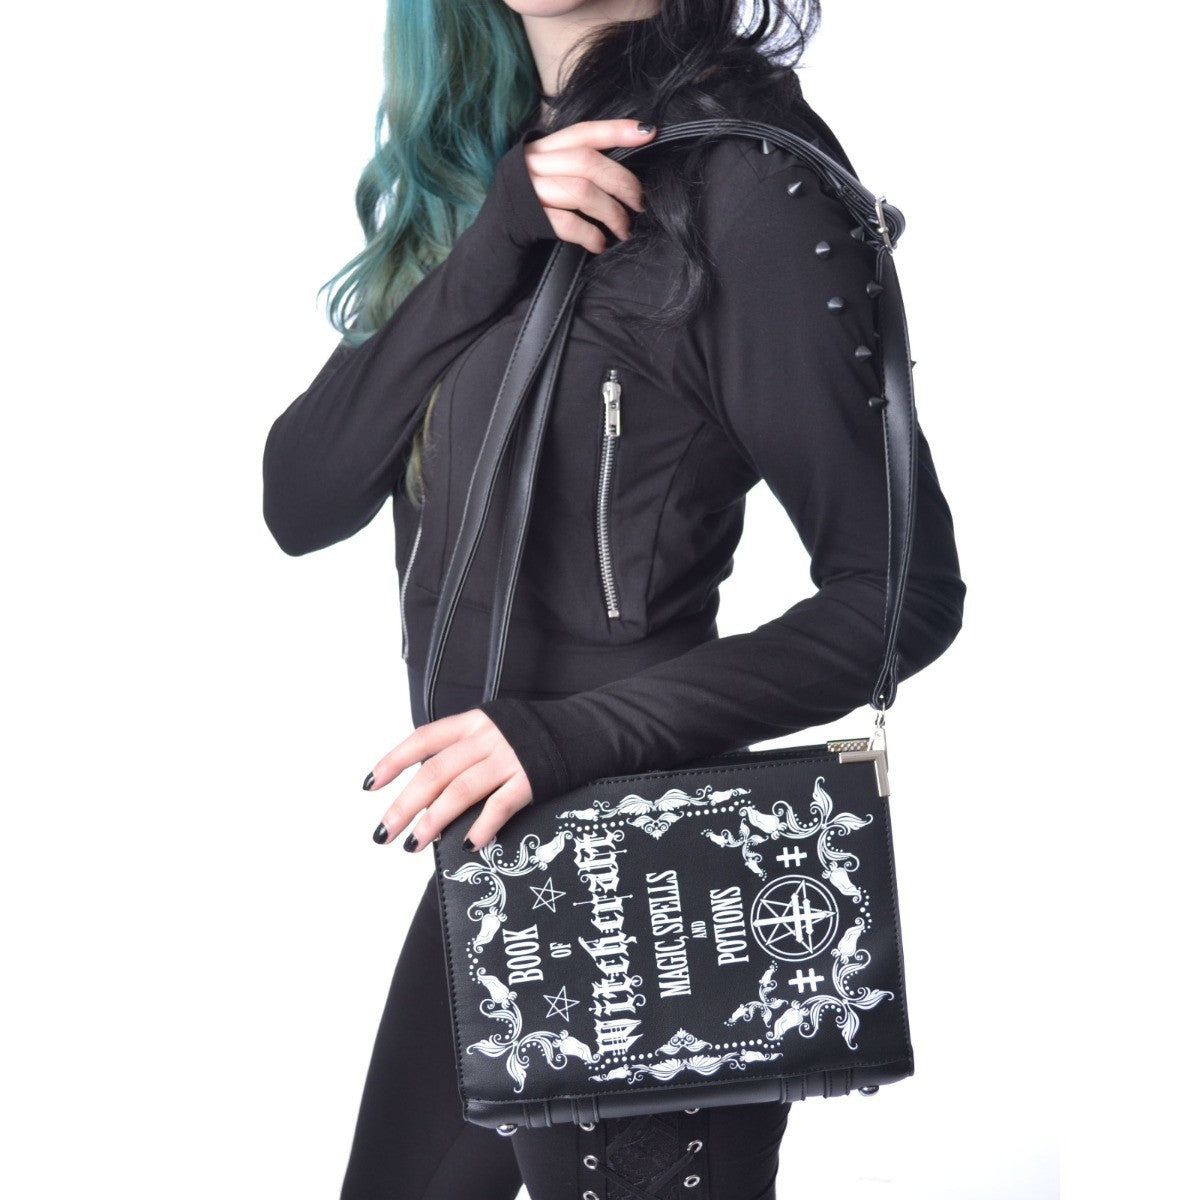 Gothic Witchcraft Magic Spells Book Bag by Heartless